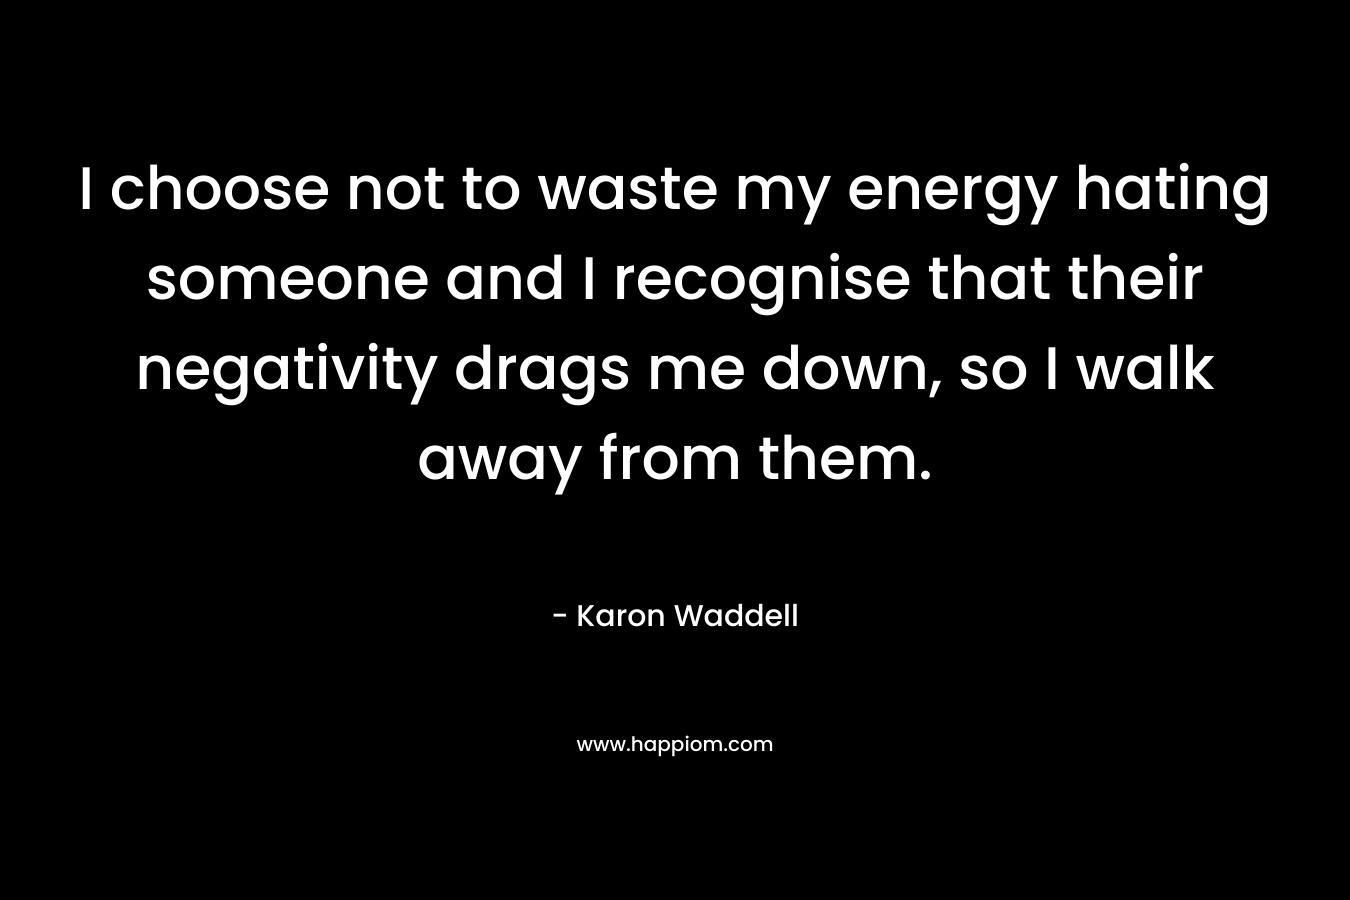 I choose not to waste my energy hating someone and I recognise that their negativity drags me down, so I walk away from them.